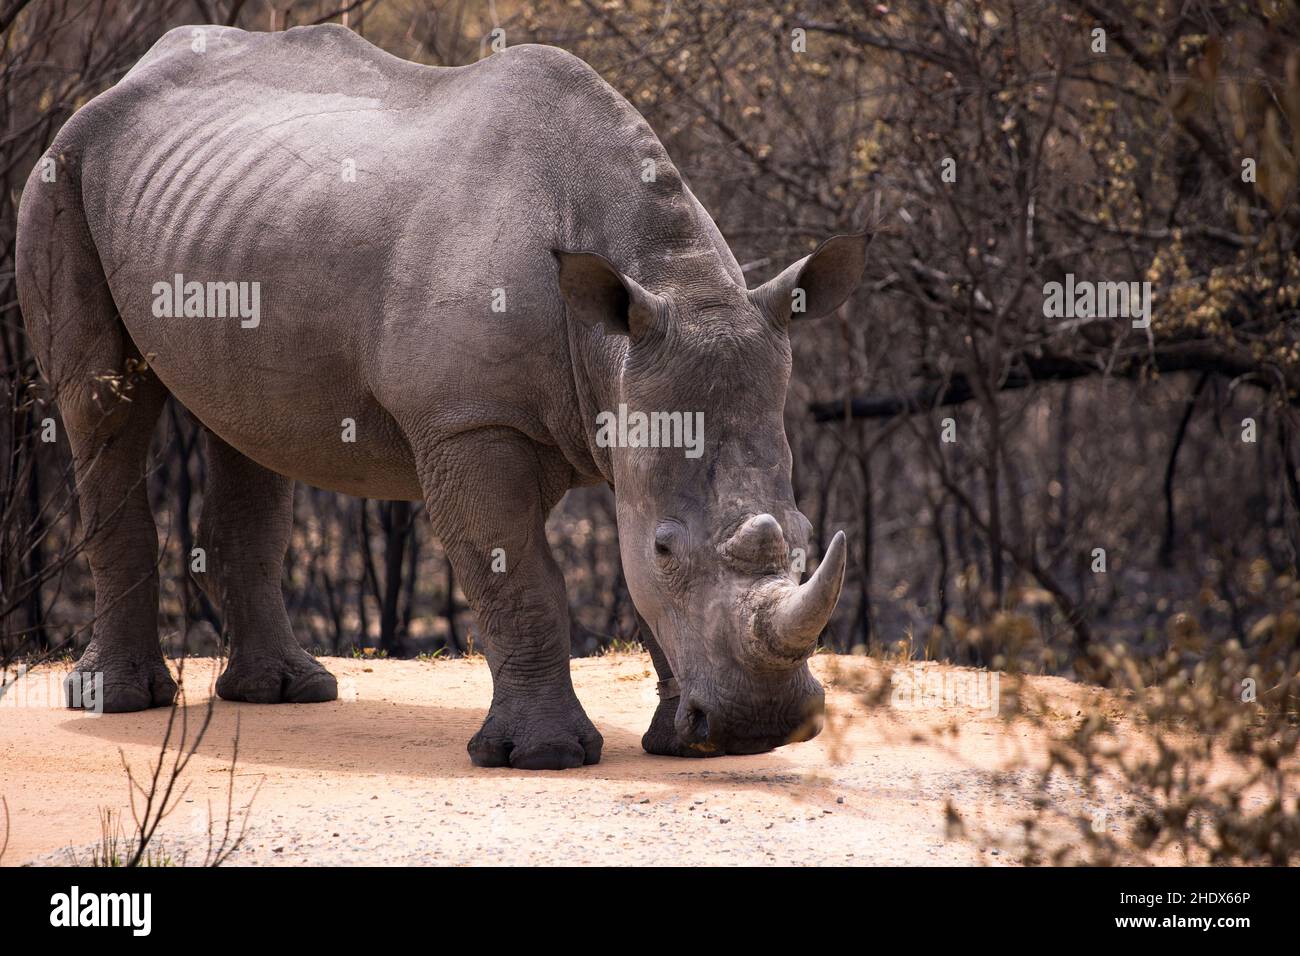 One young White rhinoceros standing in the dirt road facing the camera full length Stock Photo